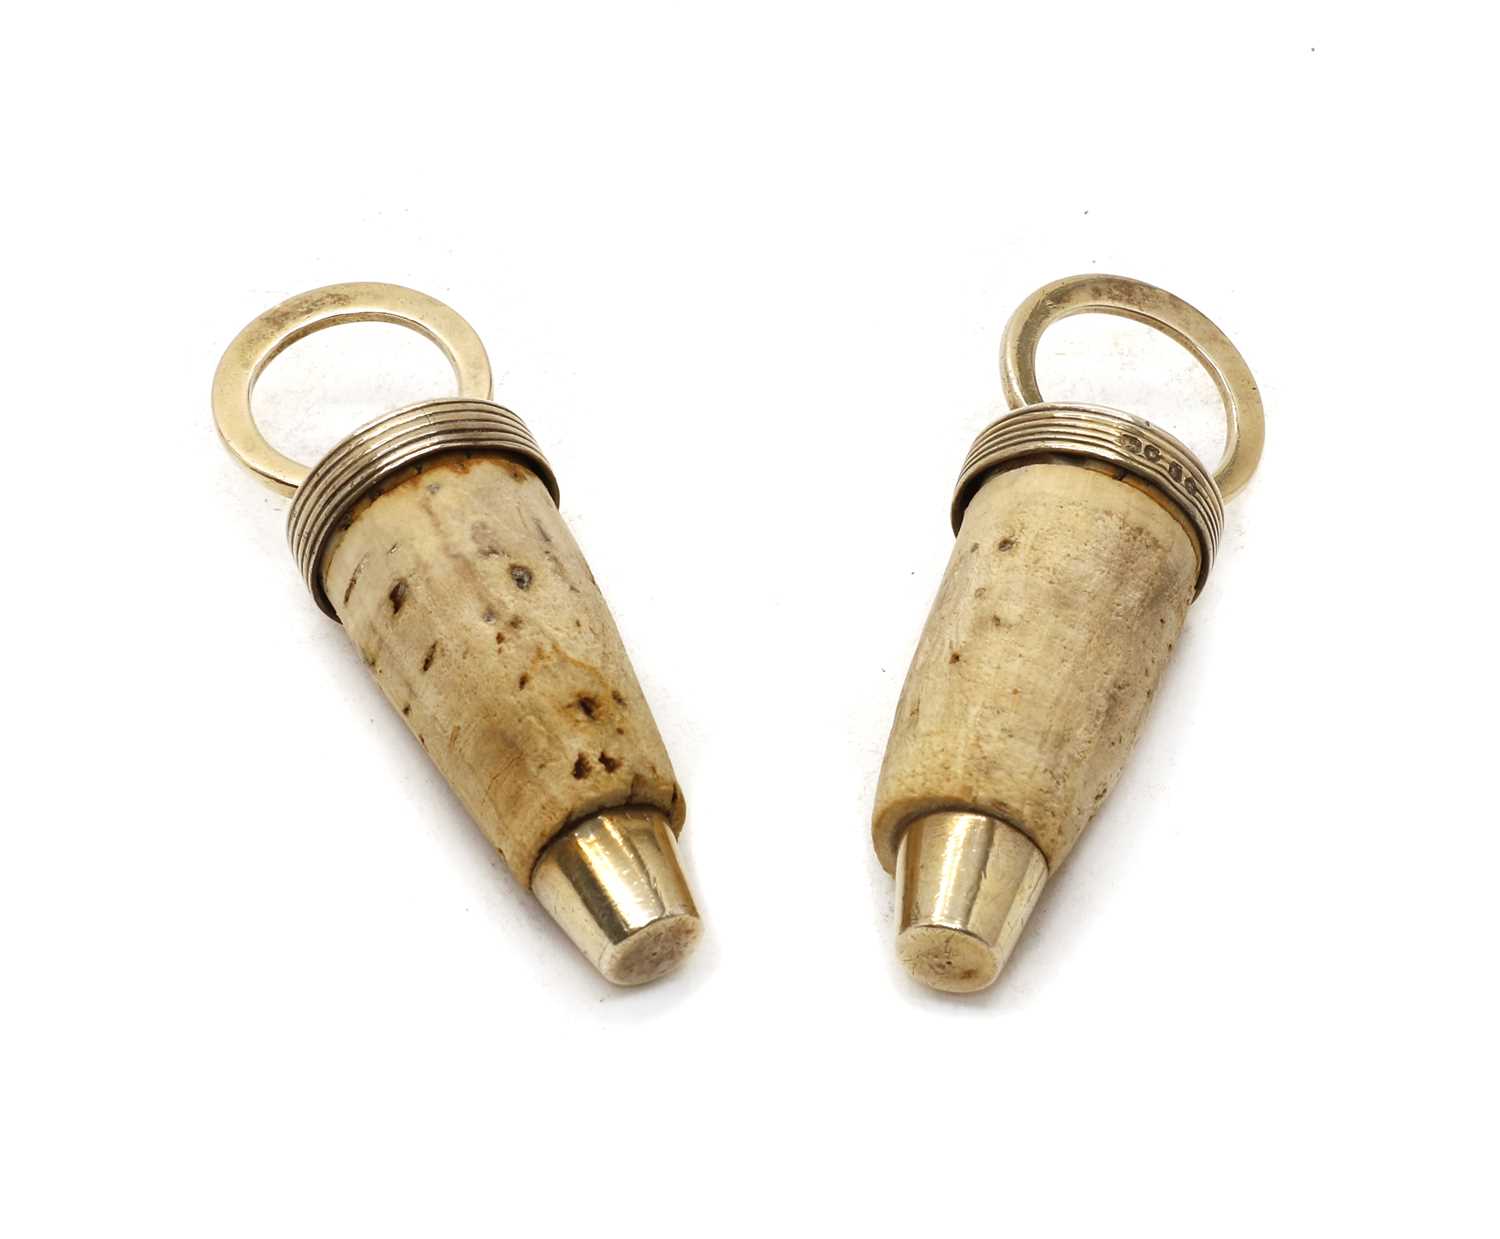 Lot 16 - Two antique silver and cork bottle stoppers